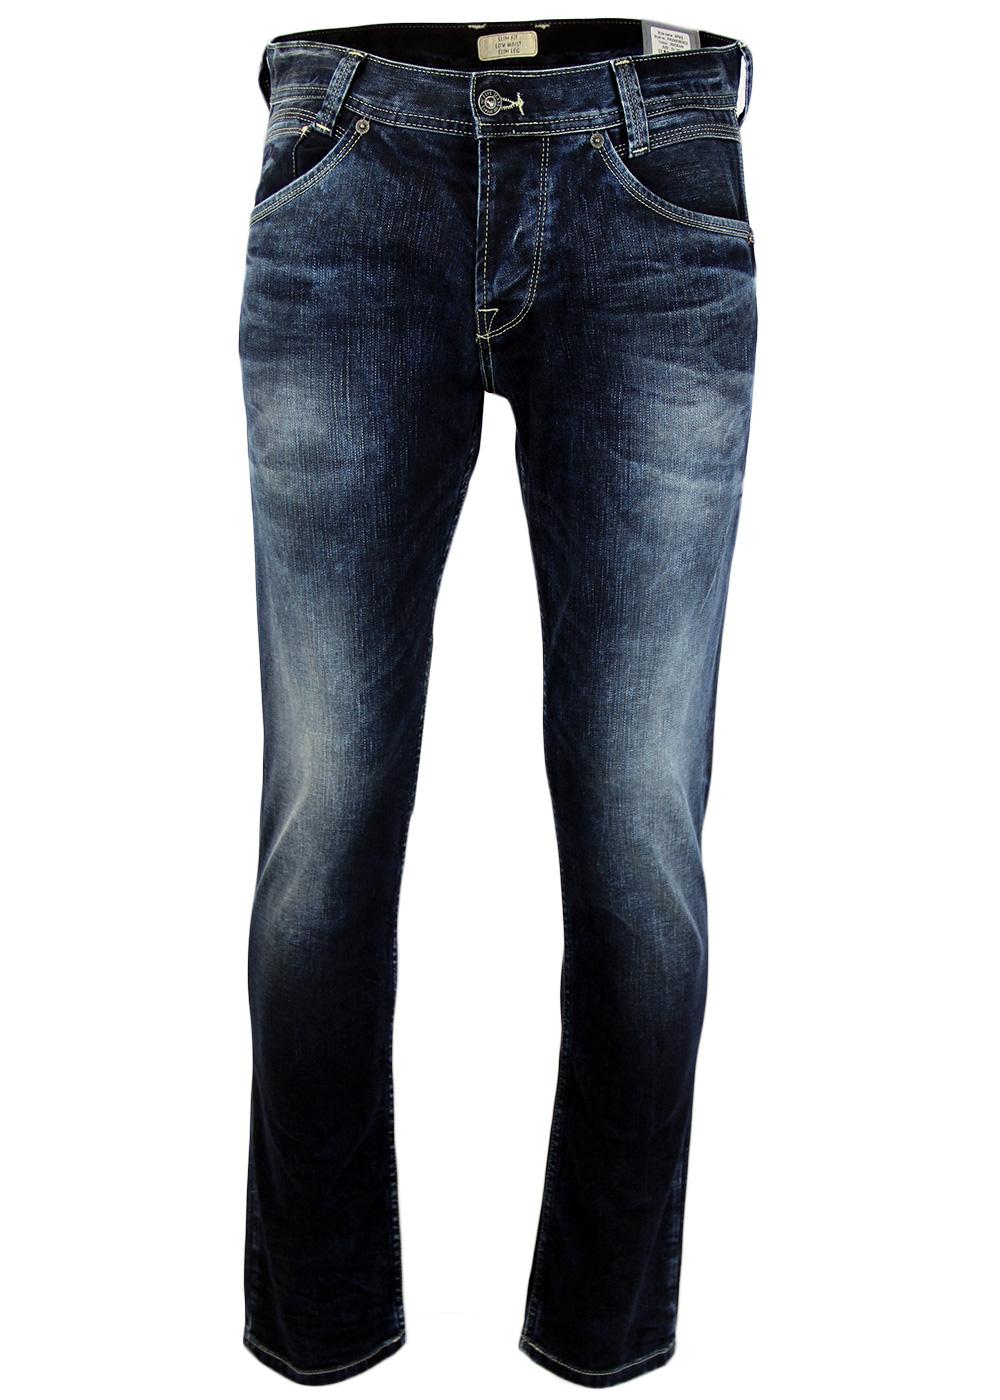 Spike PEPE JEANS Retro Mod Tapered Fit Jeans D53